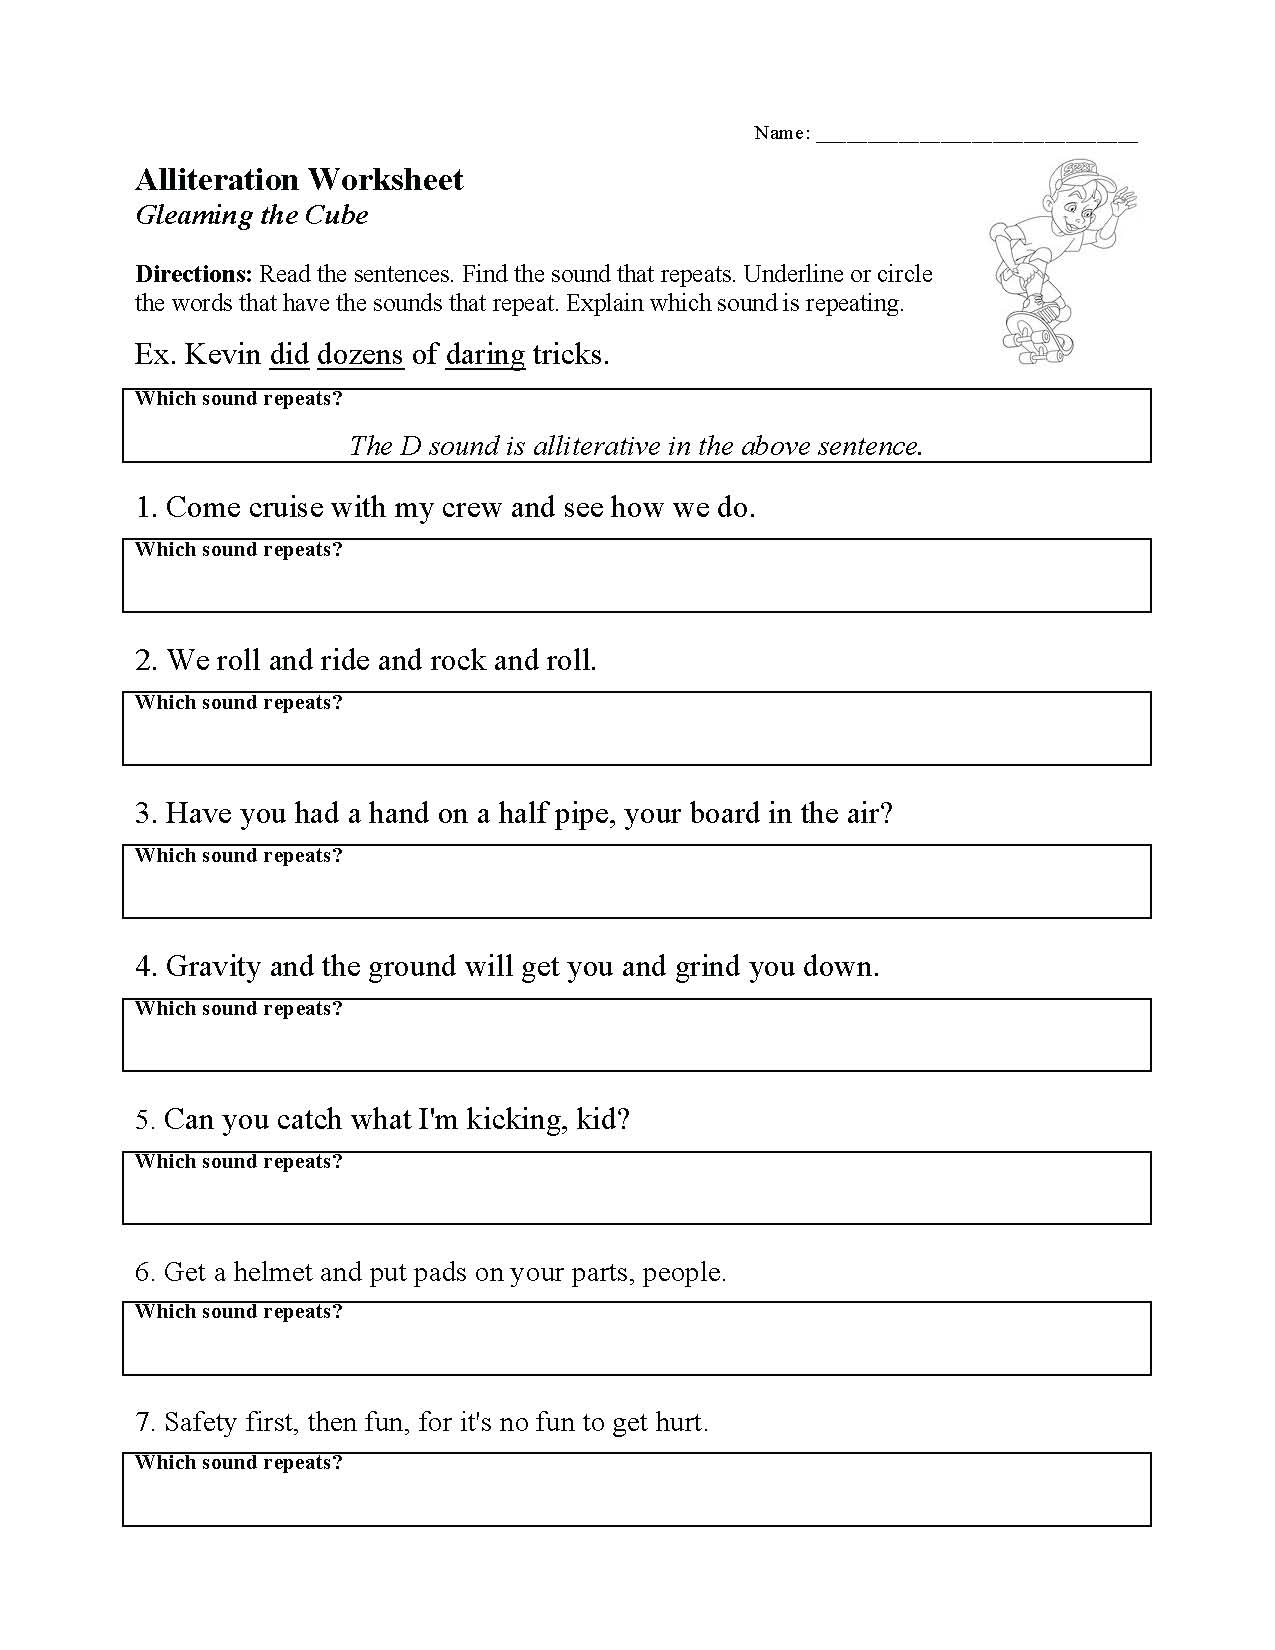 This is a preview image of one of our Literary Technique Worksheets. Click on it to view all of our worksheets on literary techniques.